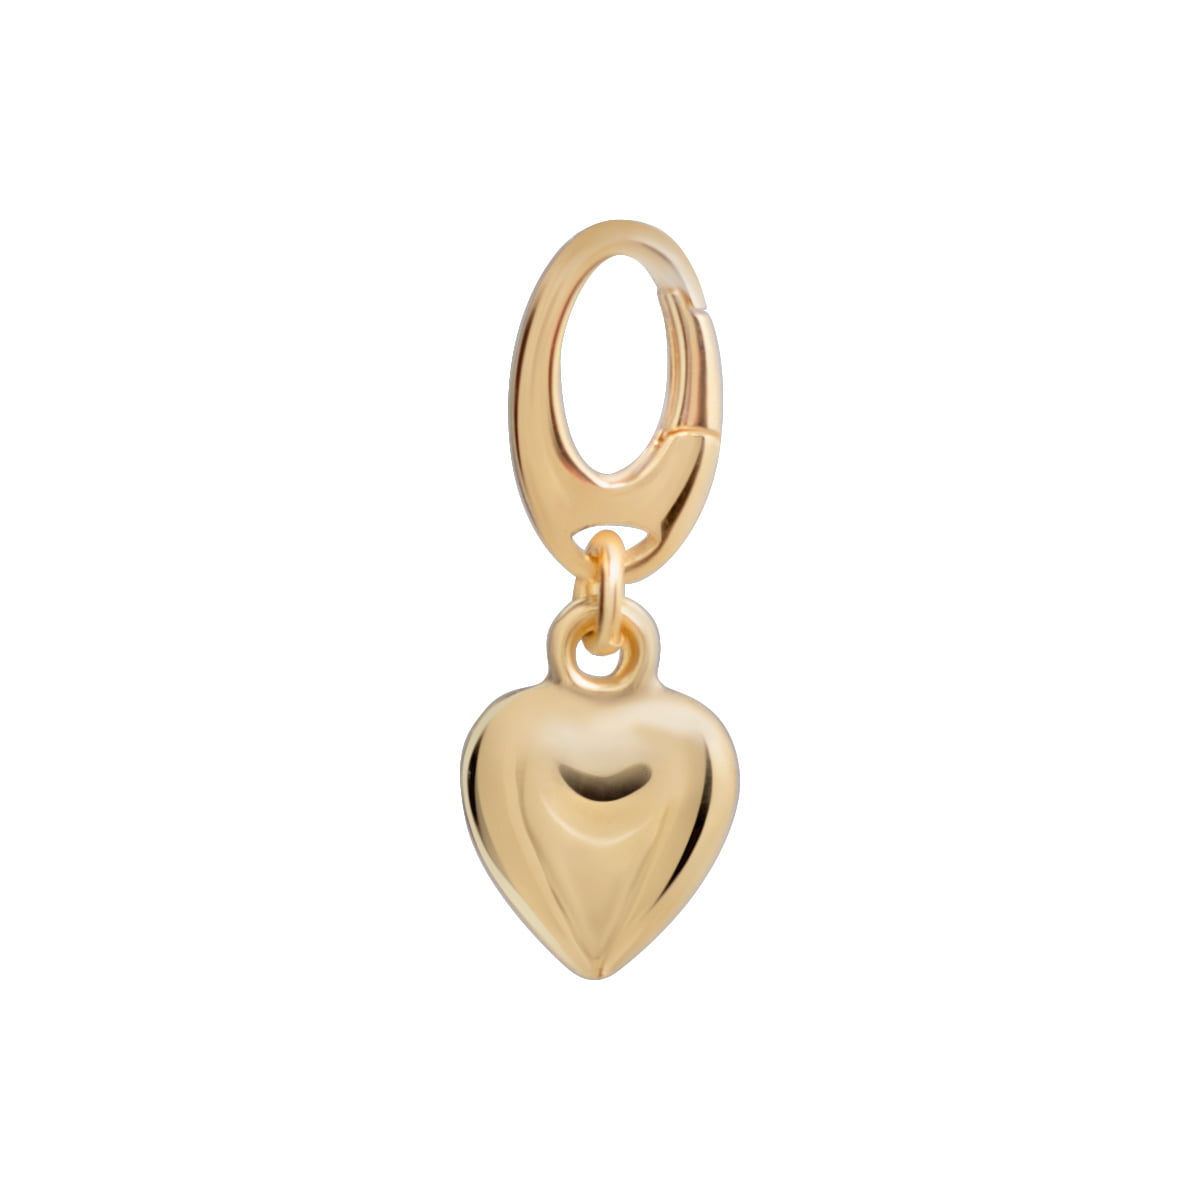 Charms for Bracelet Jewelry | Heart Charm and Ball Charm Gold Heart